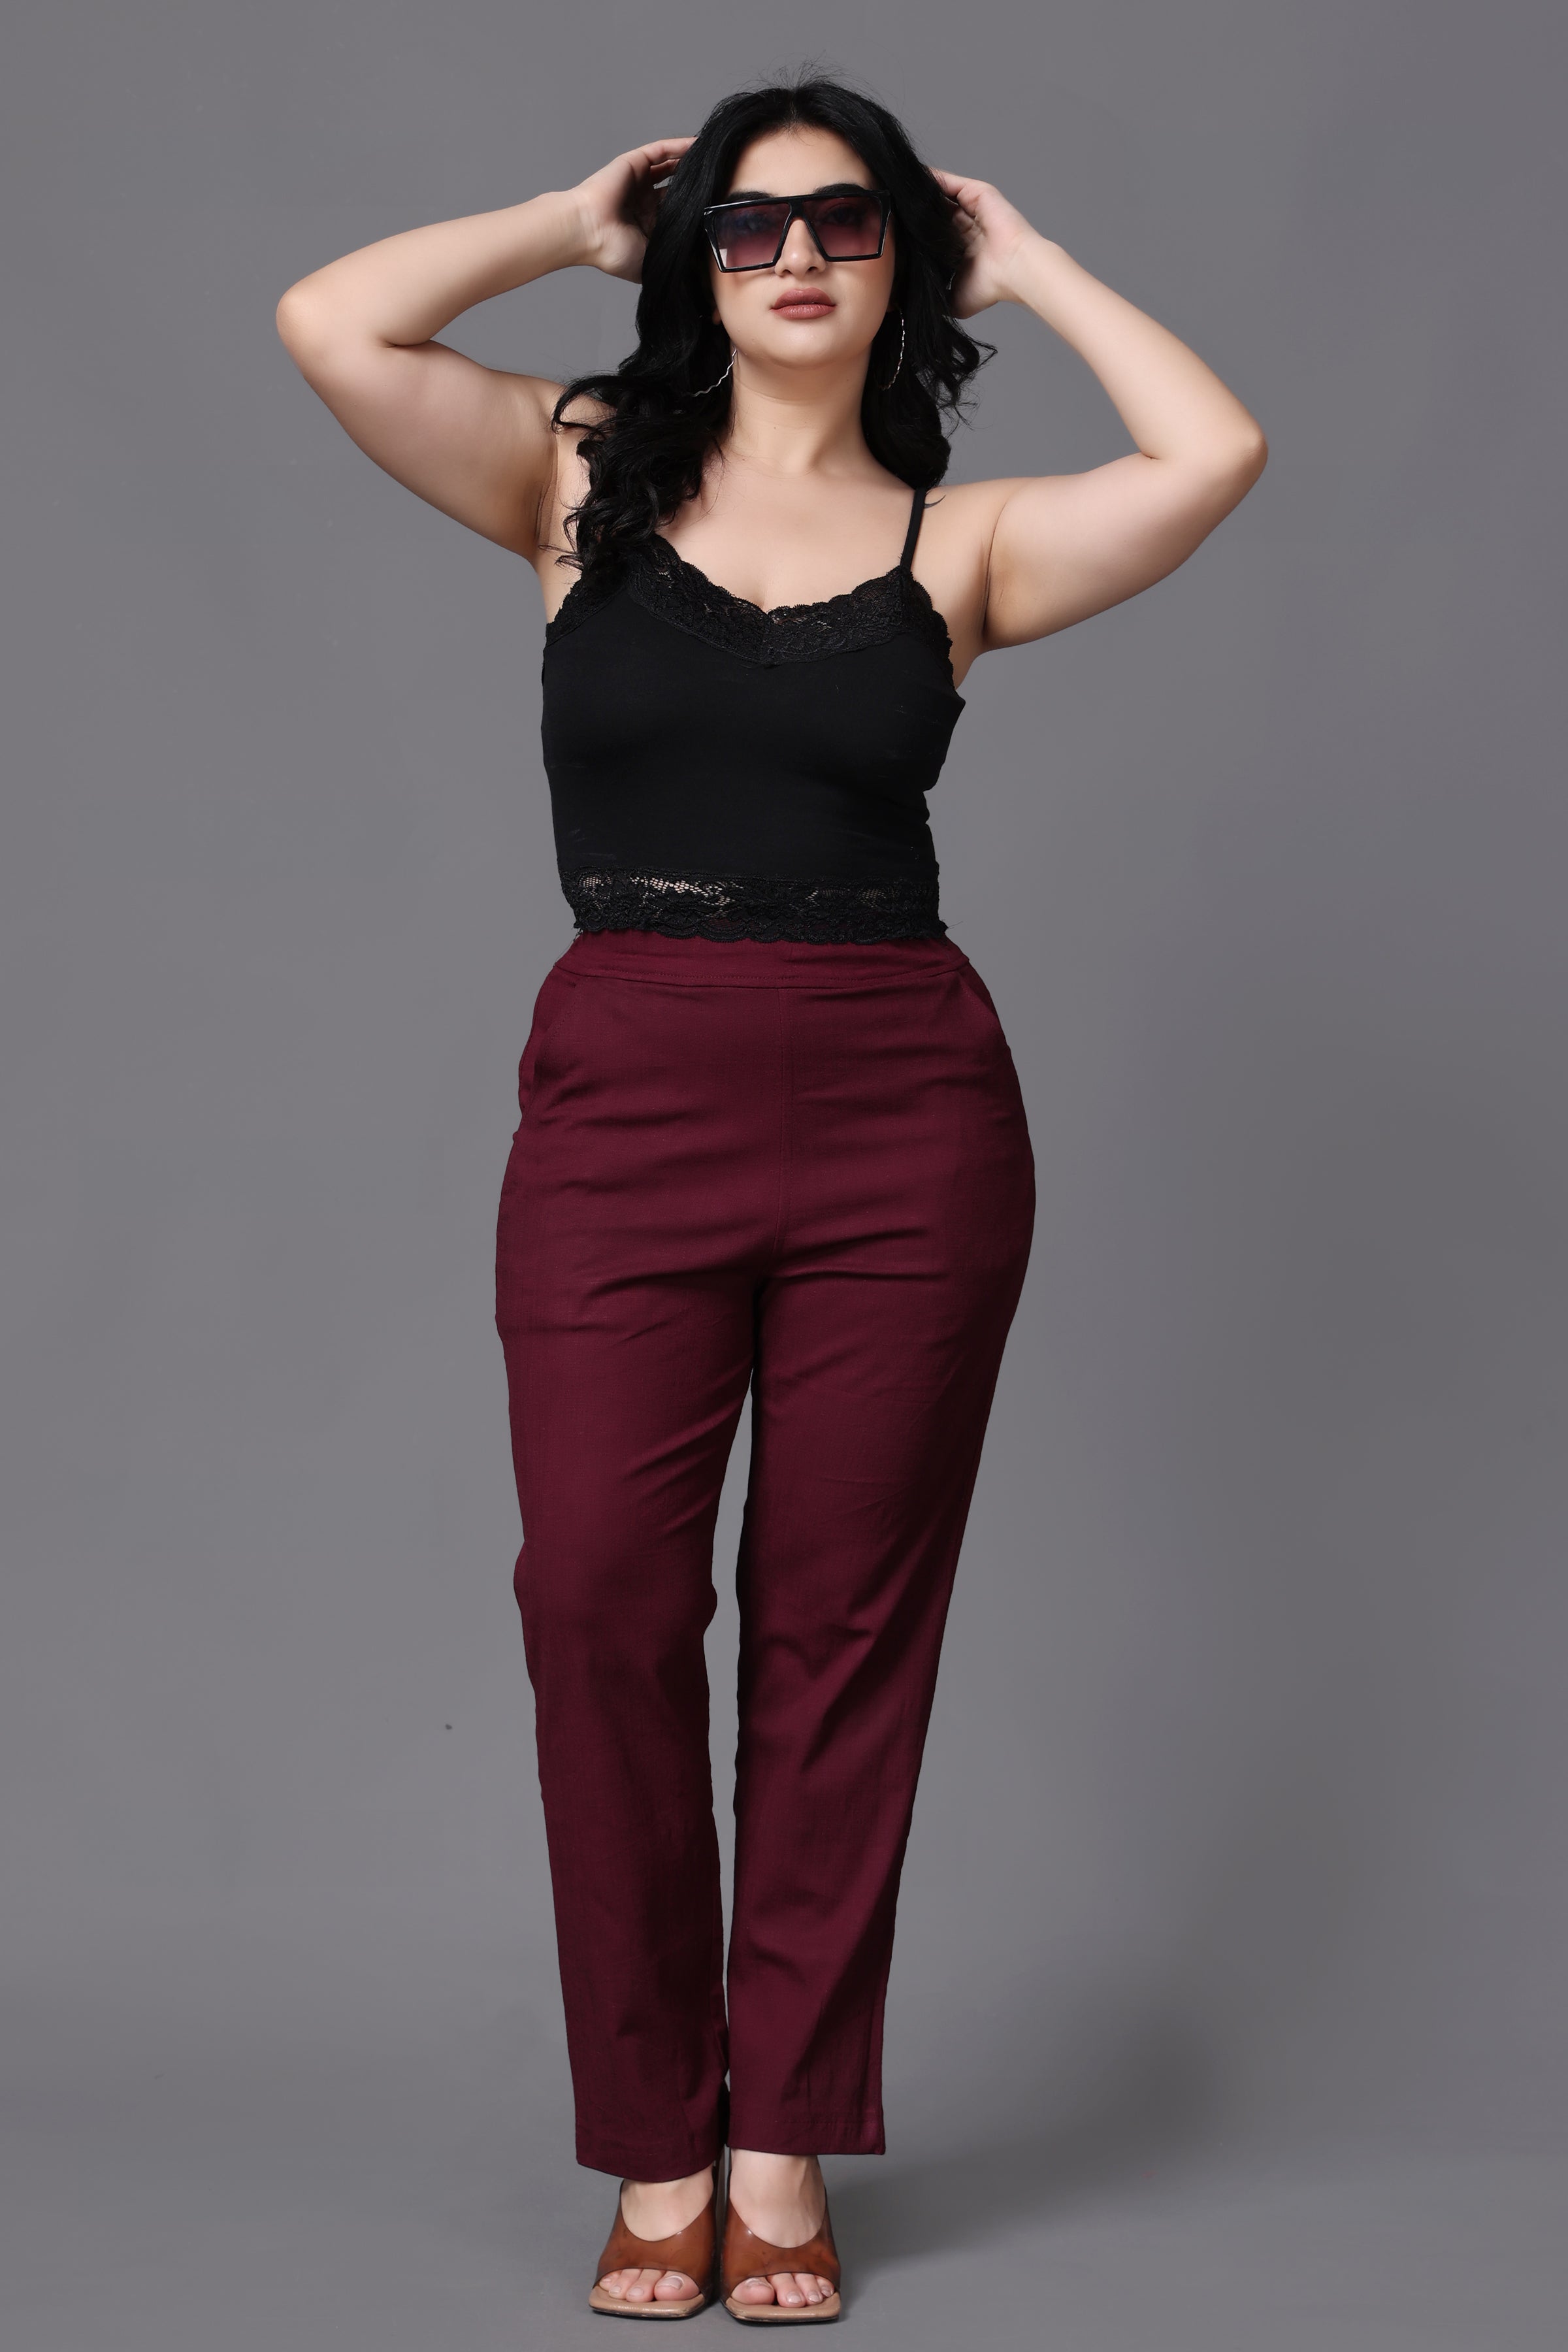 Get Lycra Trousers for Women, Free Size with best offers | Raneen.com